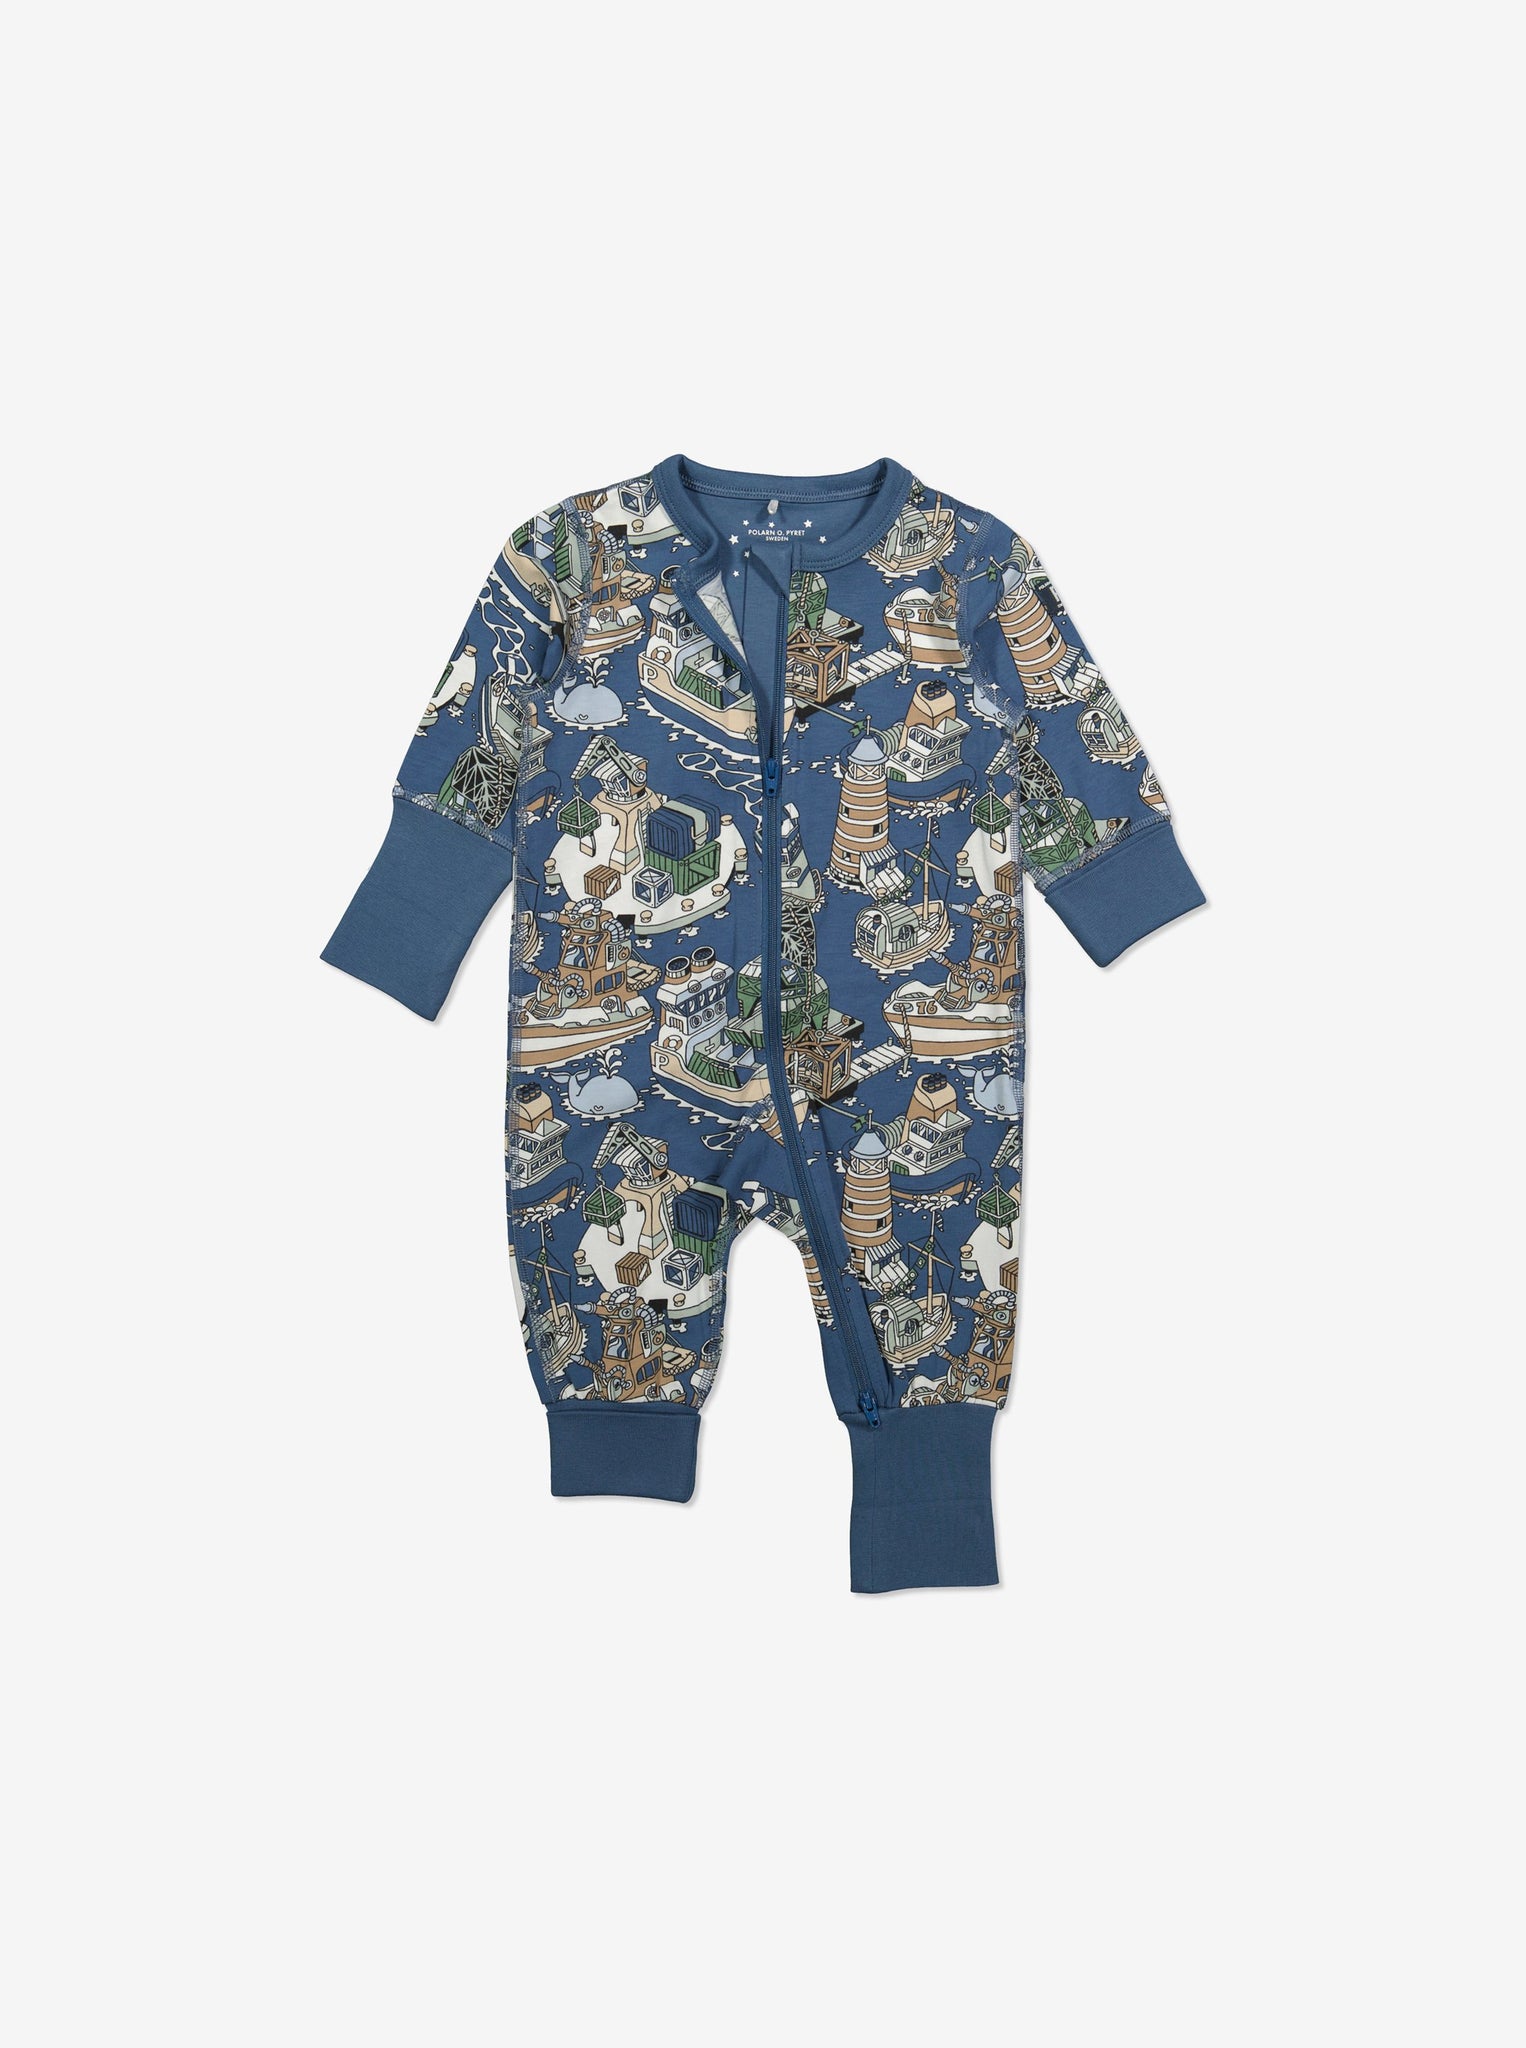  Organic Boat Blue Baby Sleepsuit from Polarn O. Pyret Kidswear. Made from eco-friendly materials.